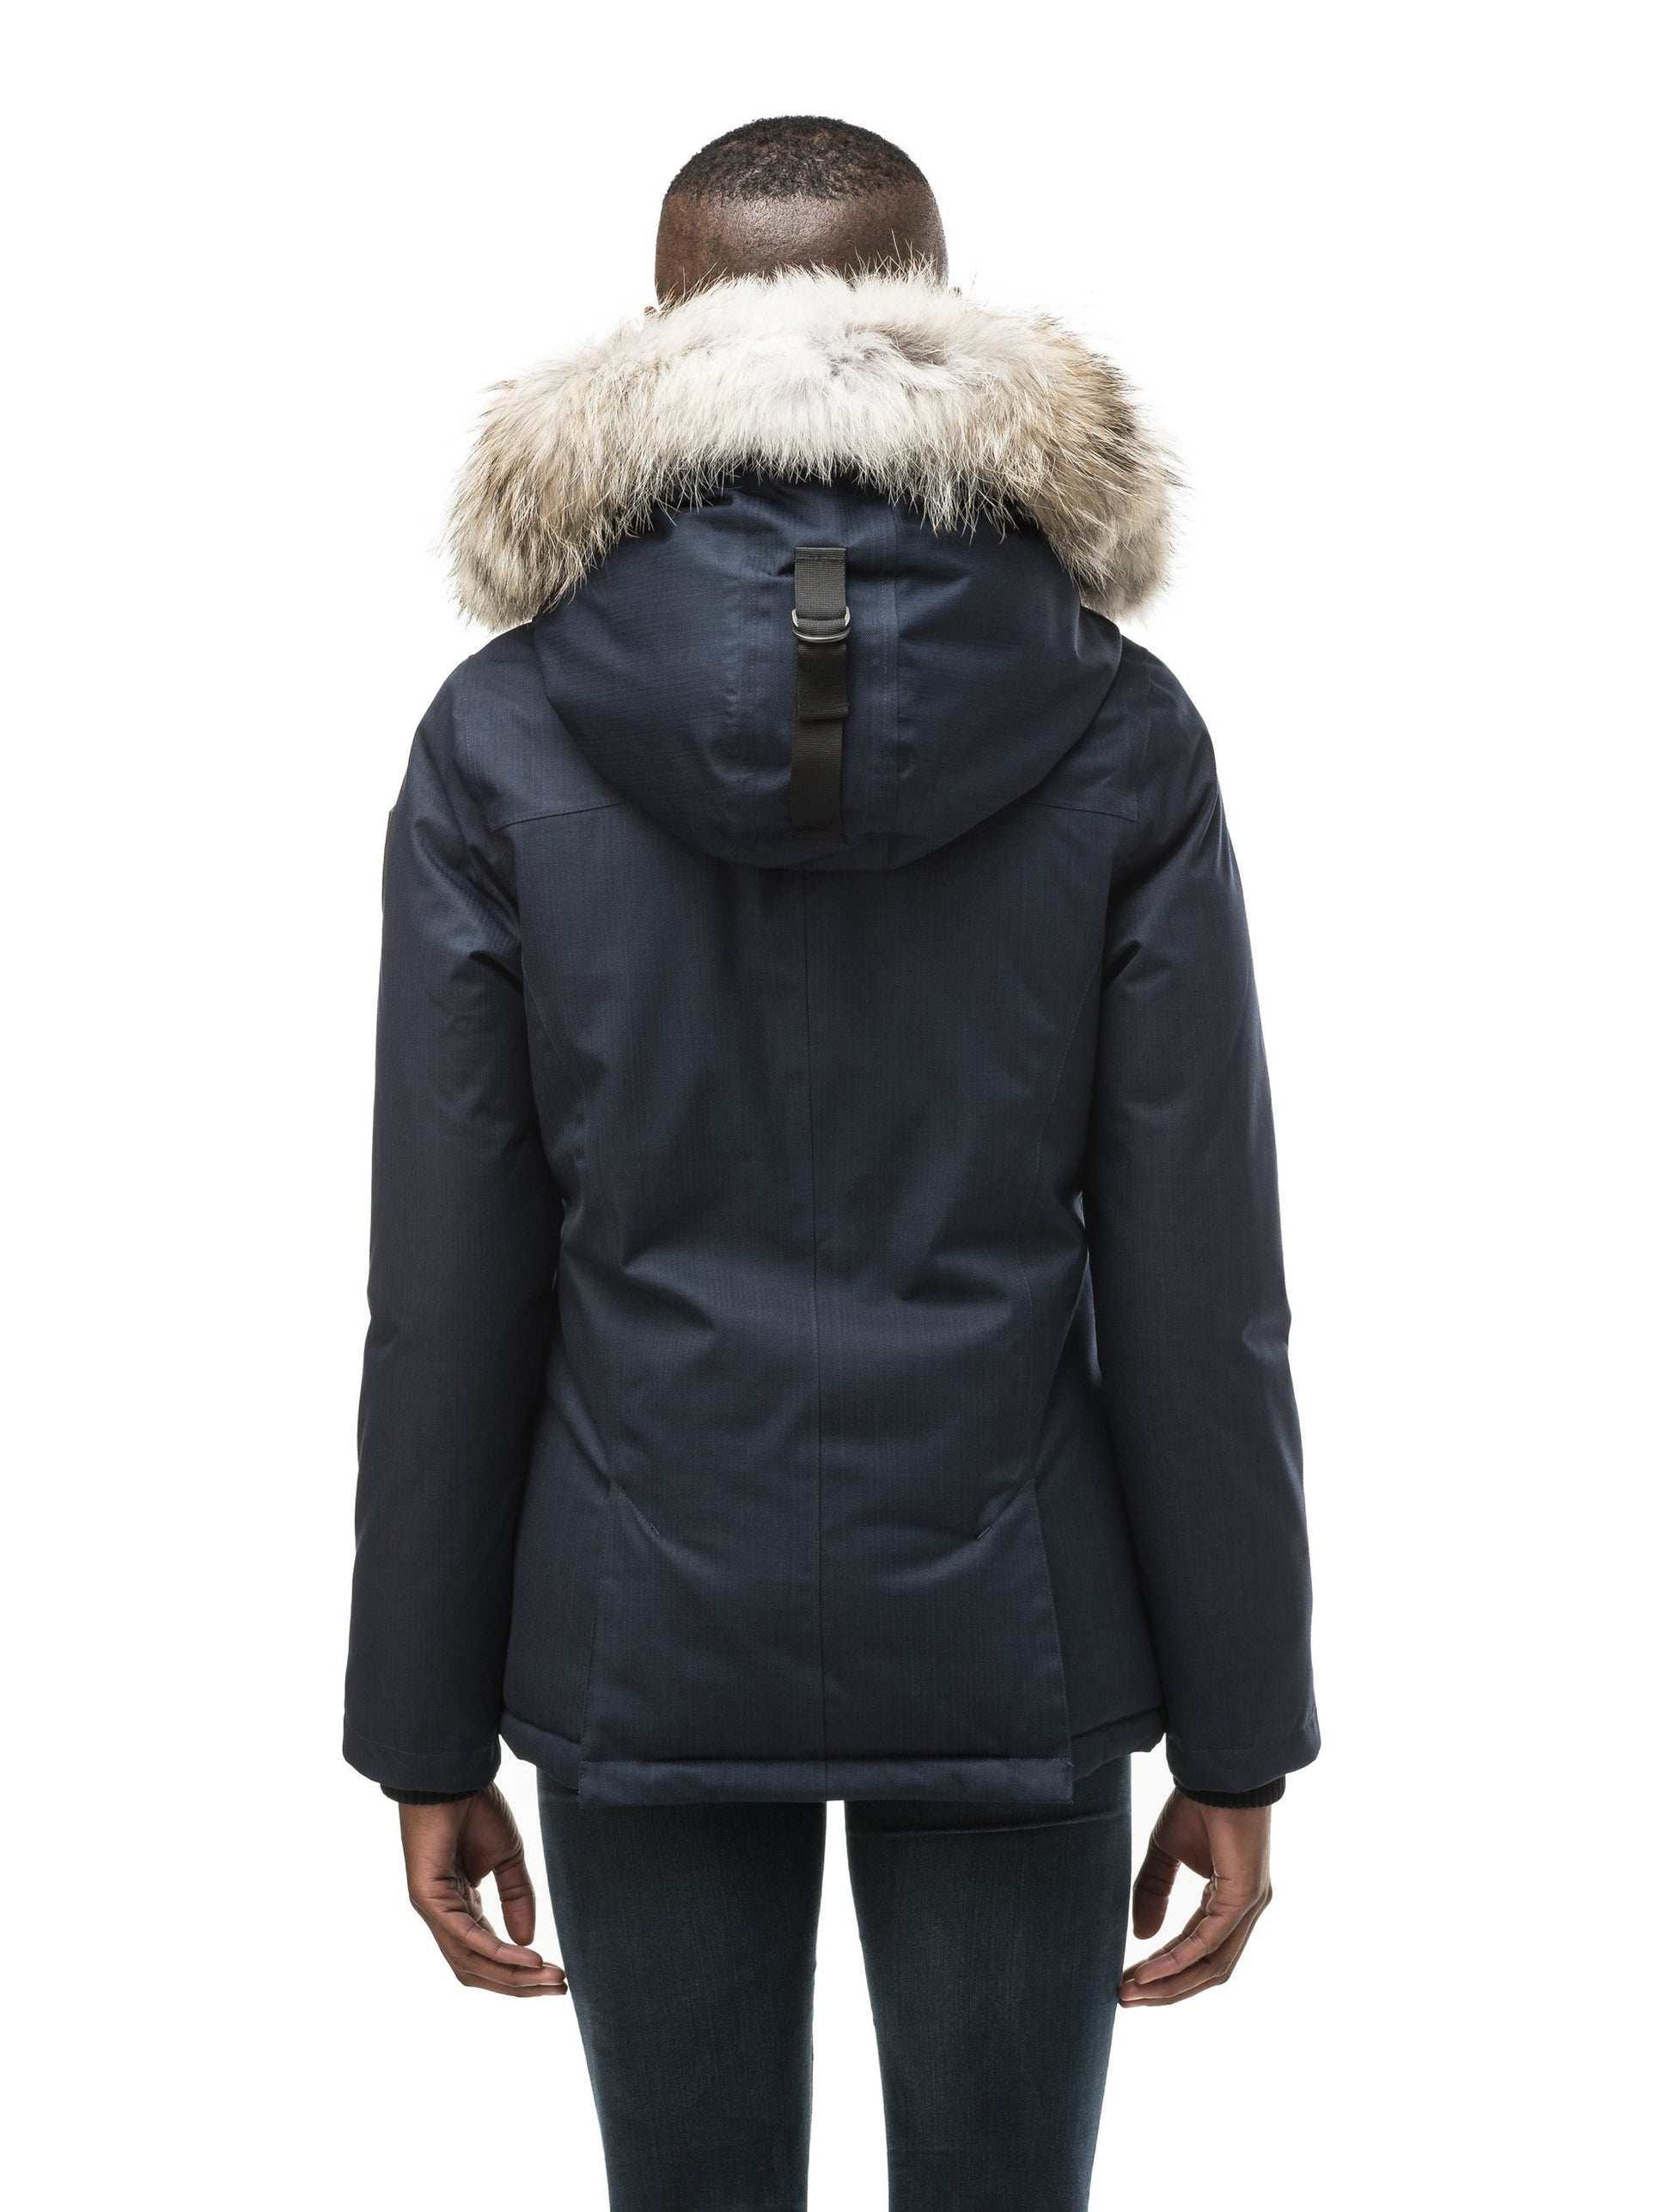 Women's hip length down filled parka in CH Navy